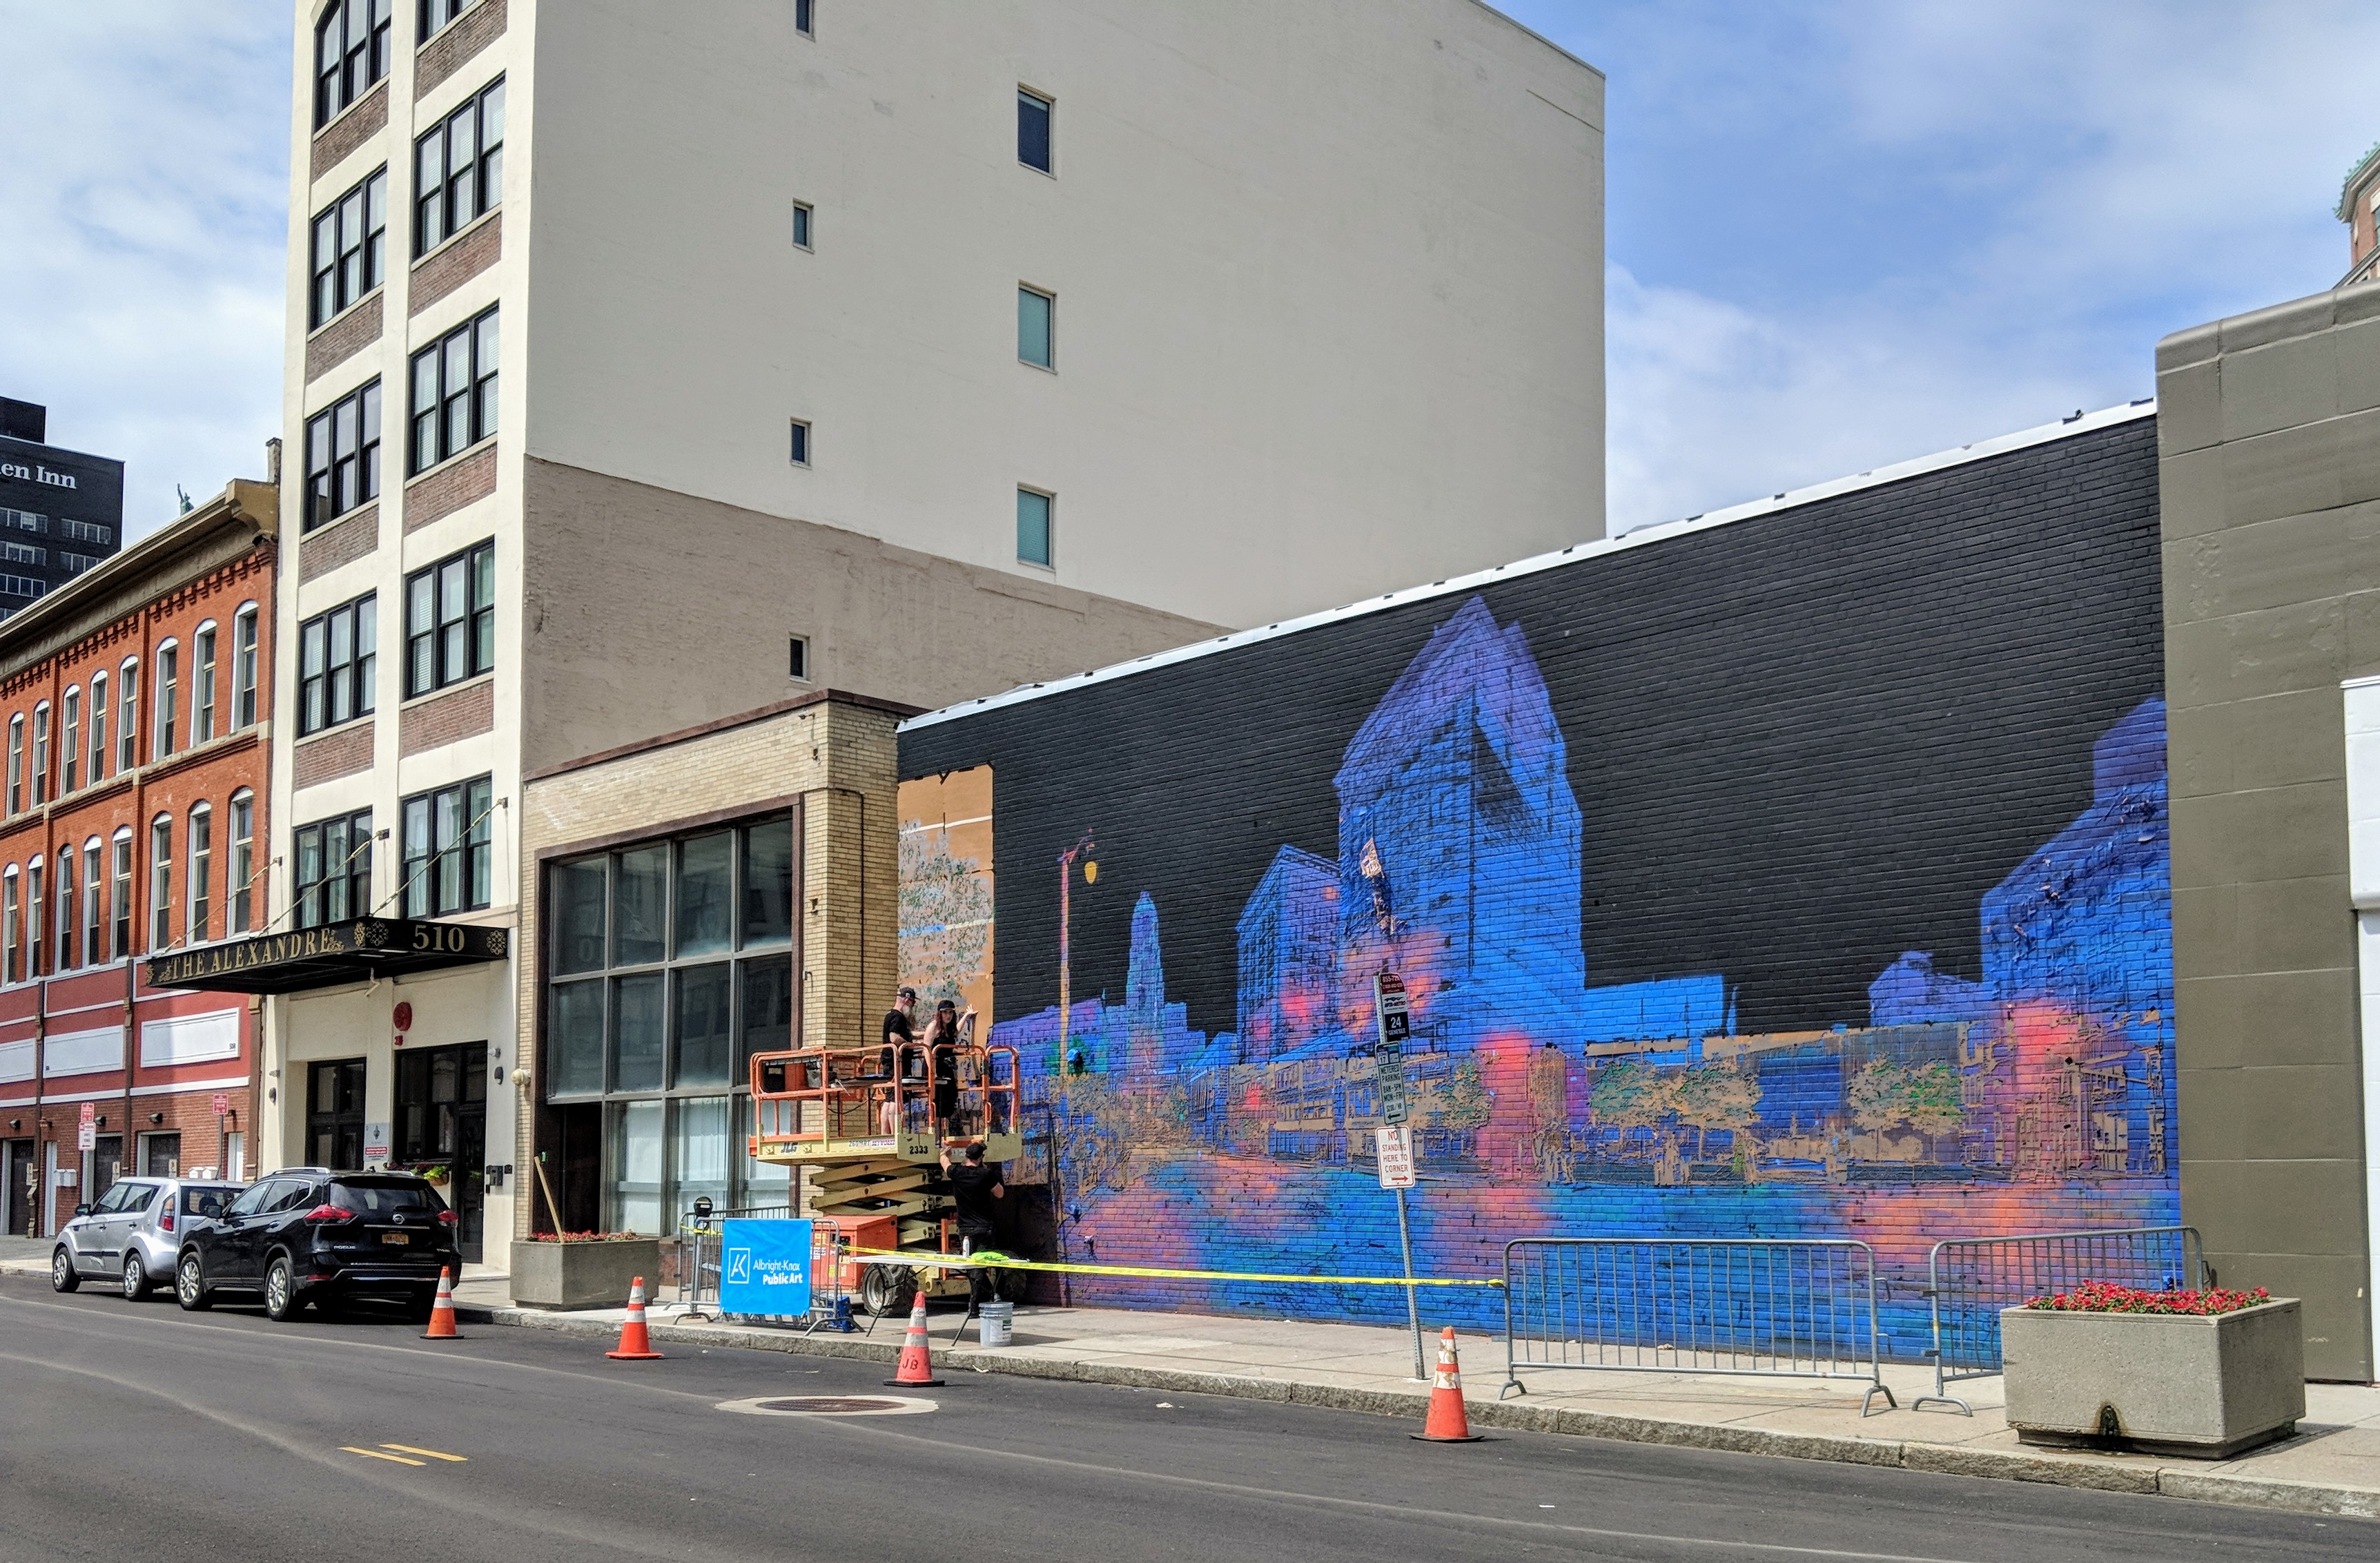 Stunning new mural being installed in downtown Buffalo